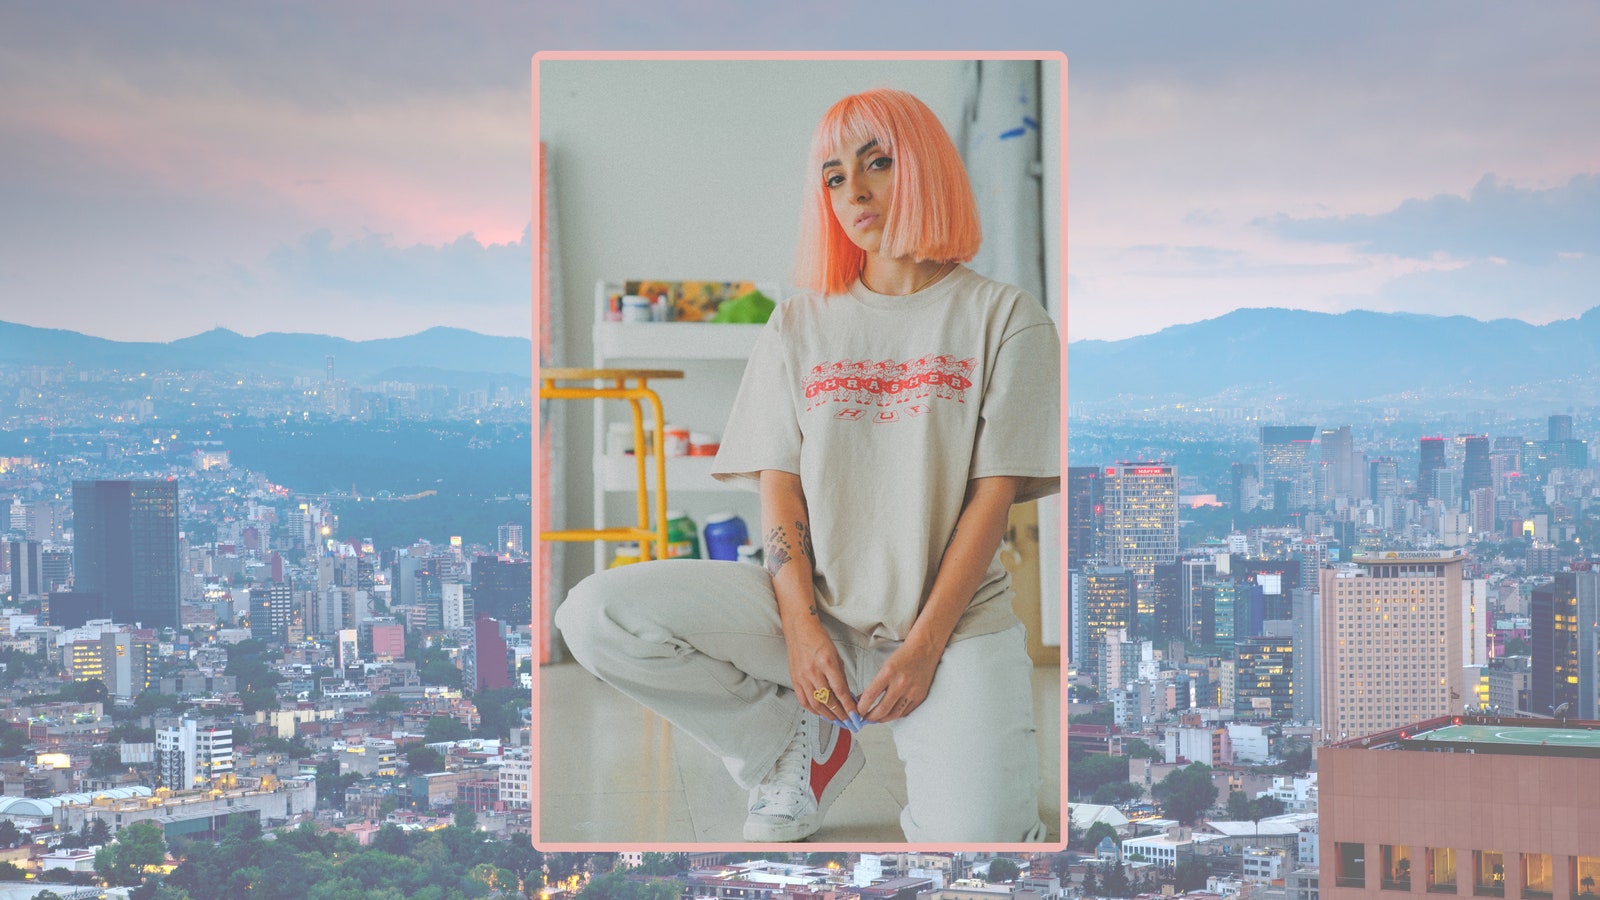 A person with pink hair on a background of a city